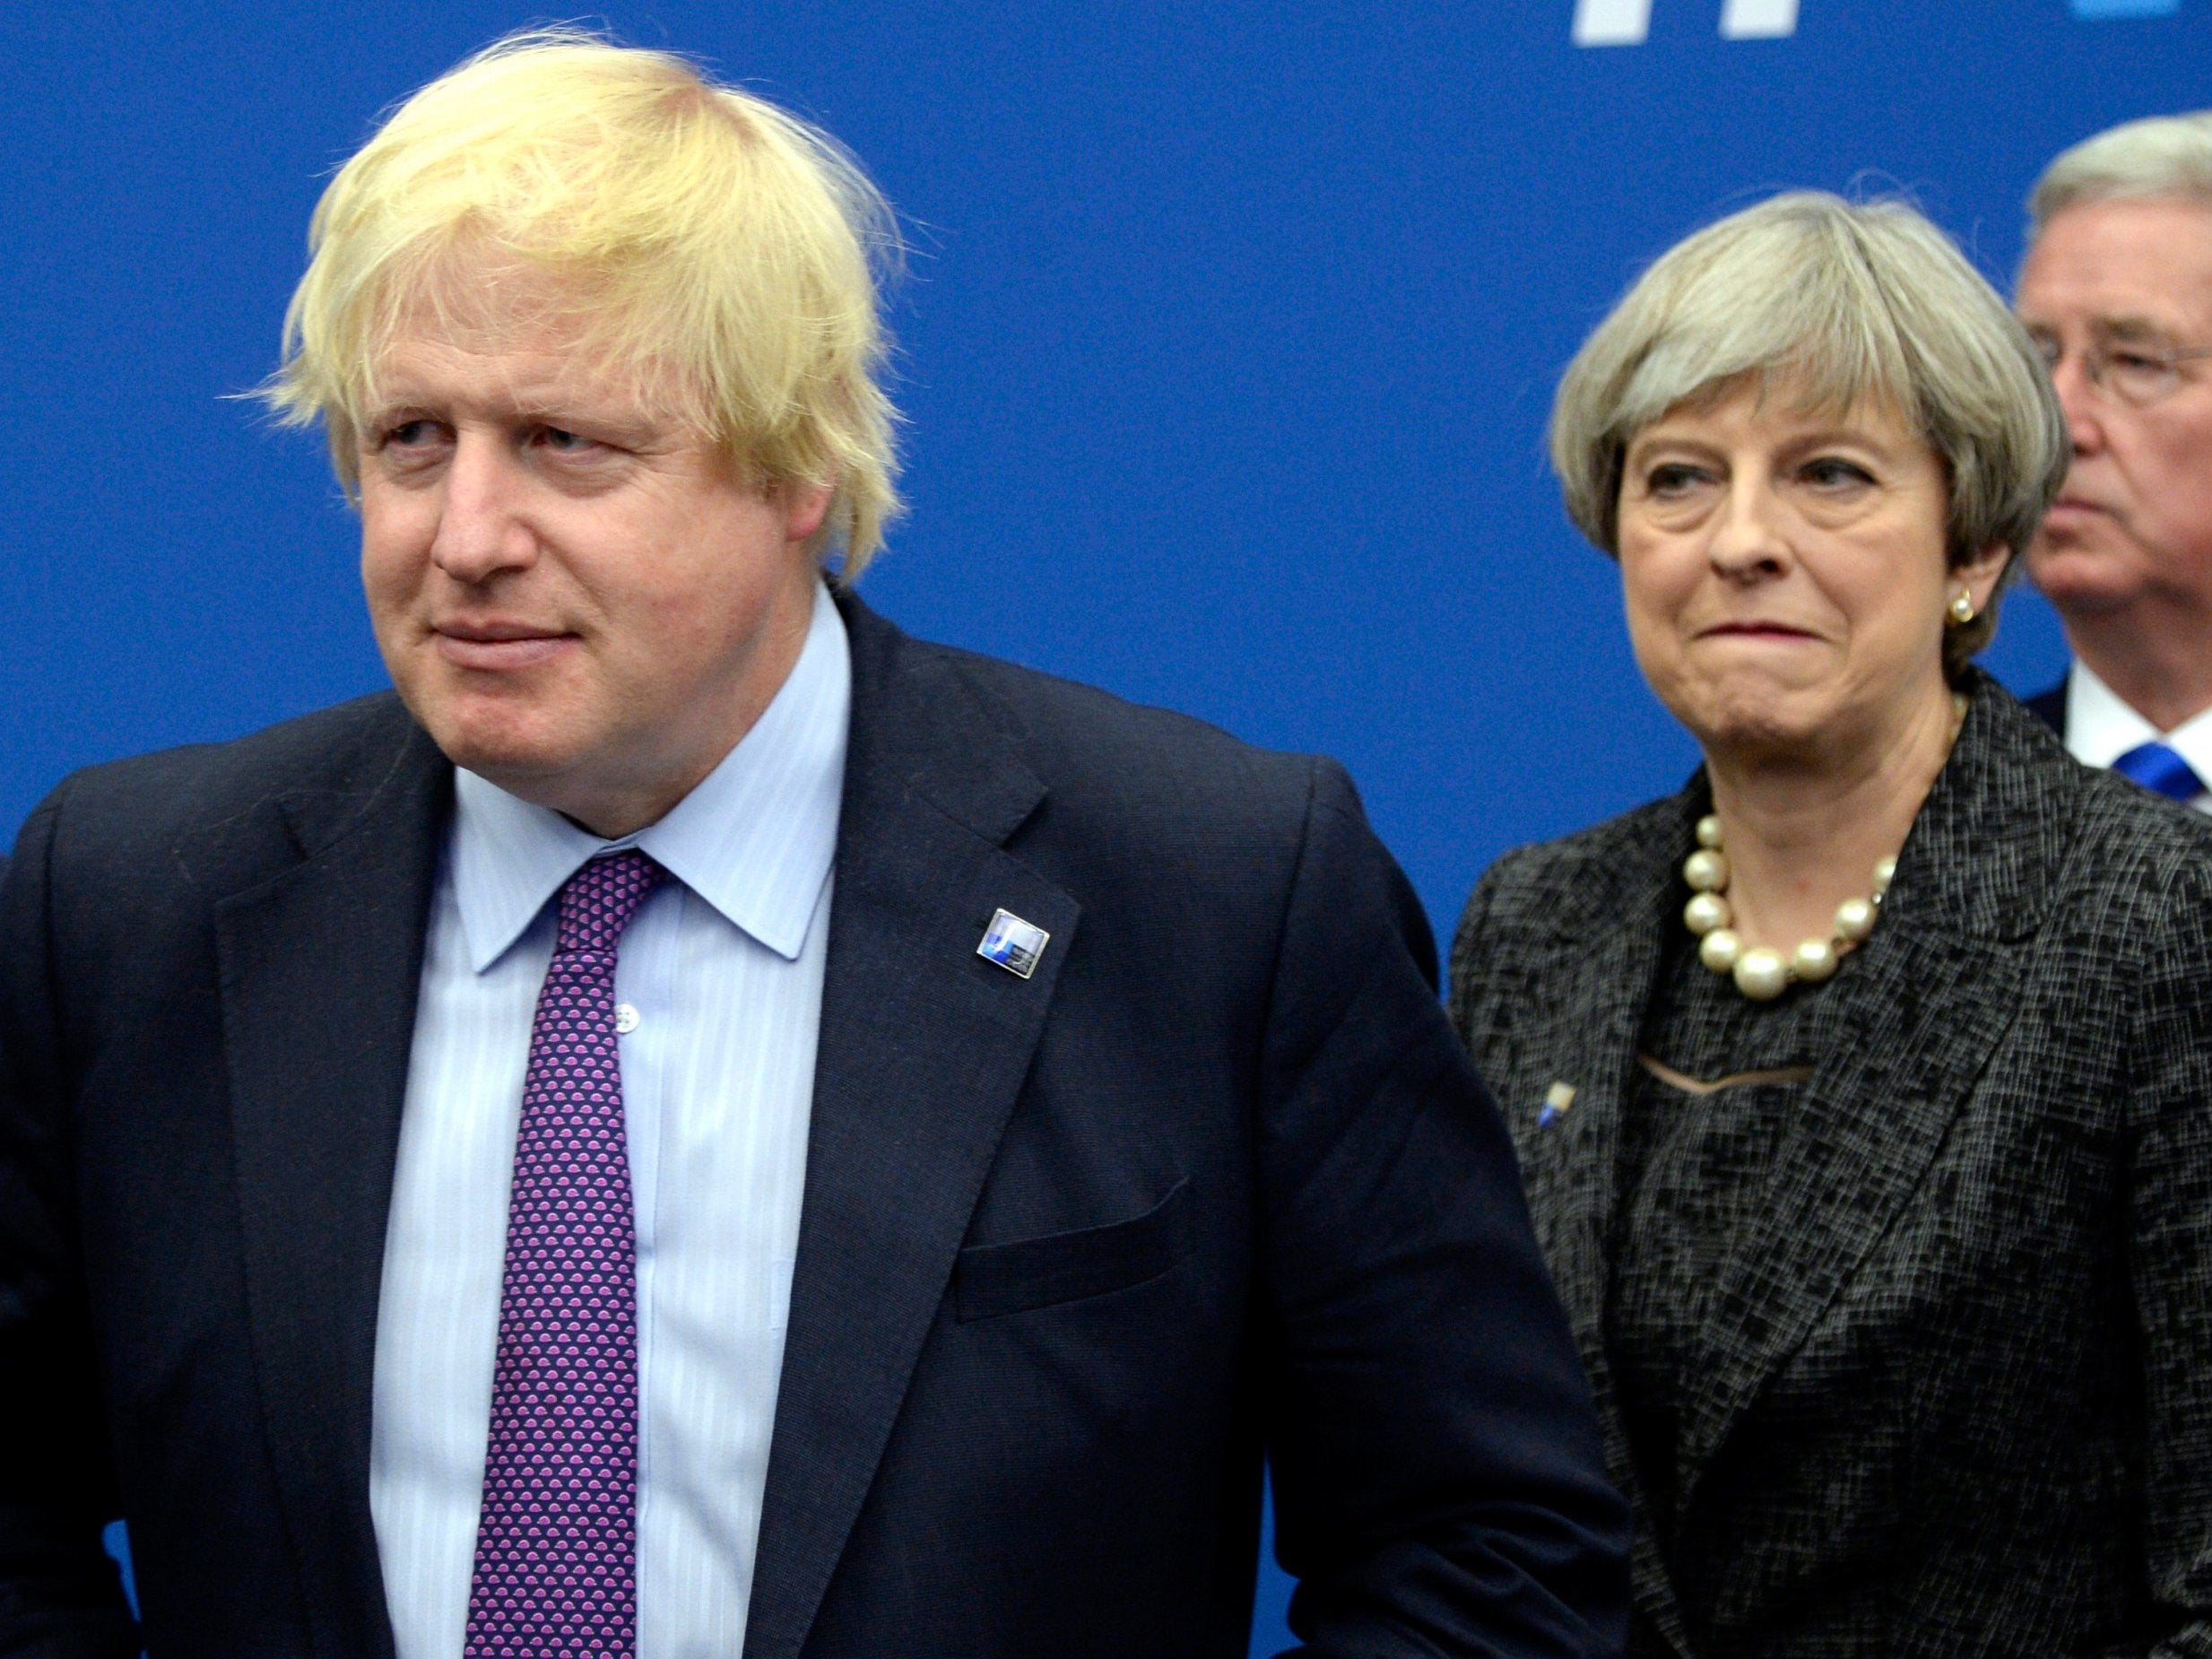 May looks about as pleased as I was to see Boris make off with my ideas